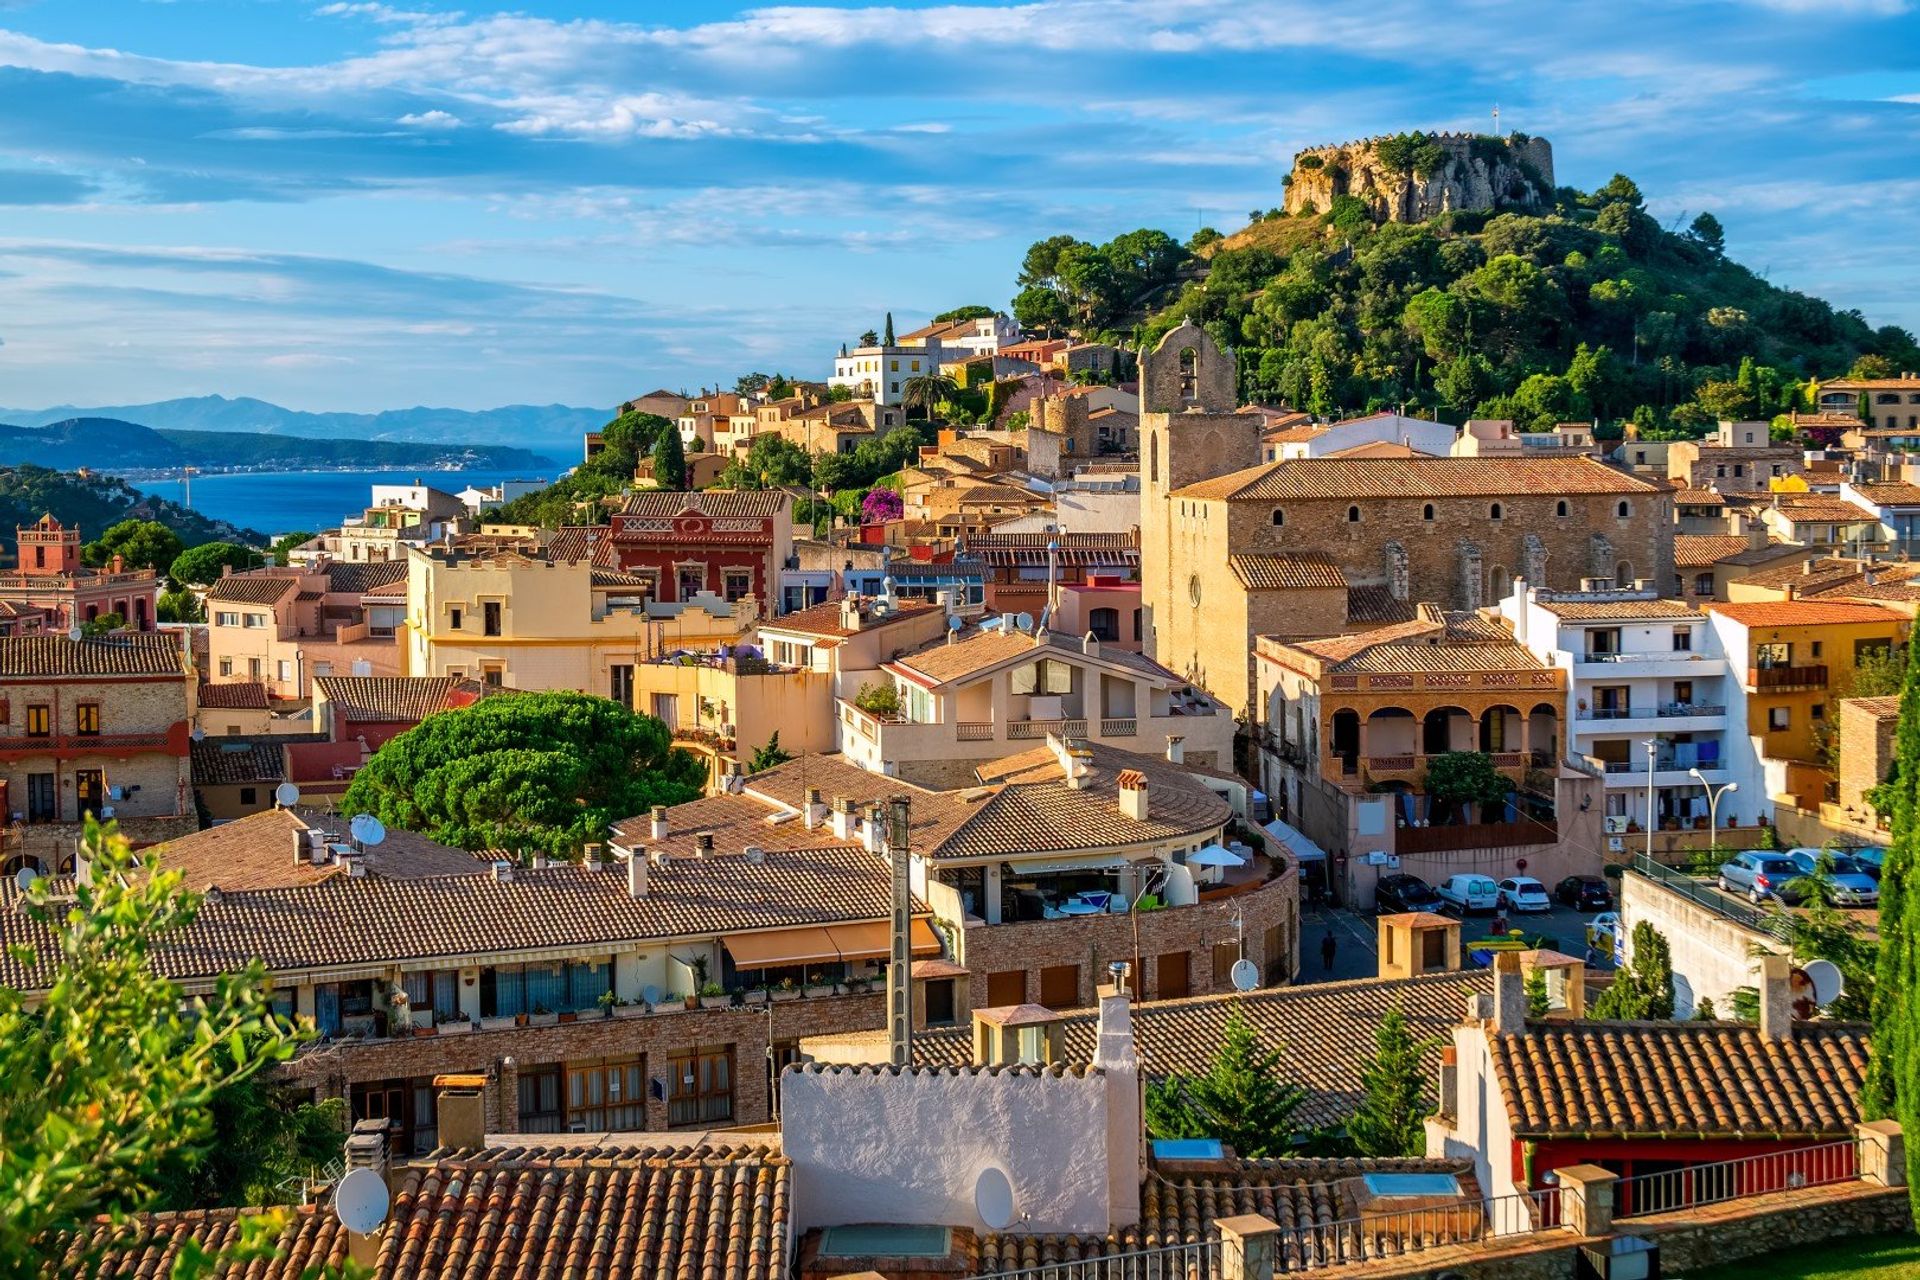 Begur's old town with hilltop Begur Castle in the background